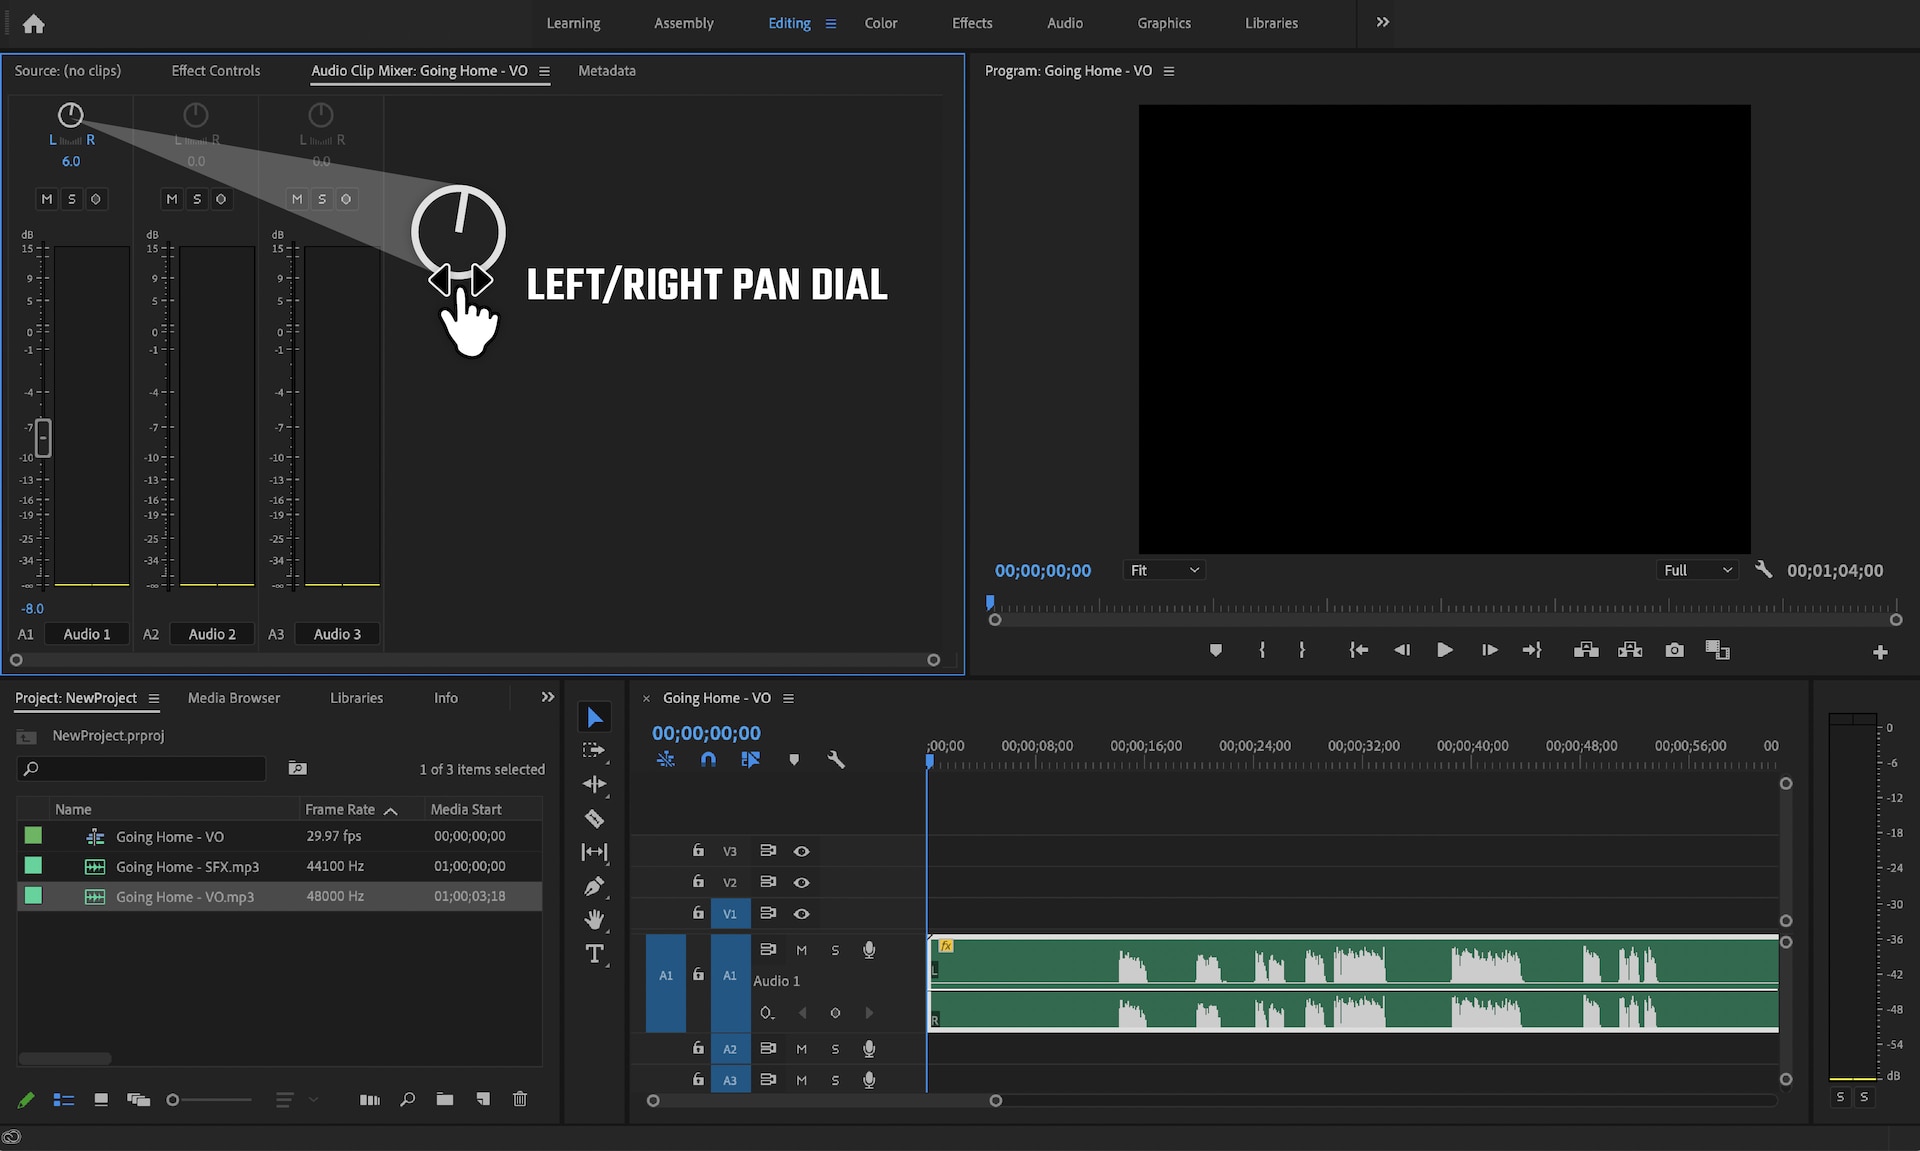 Screenshot of Adobe Premiere Pro with audio clip mixer panel open and audio pan dial featured.